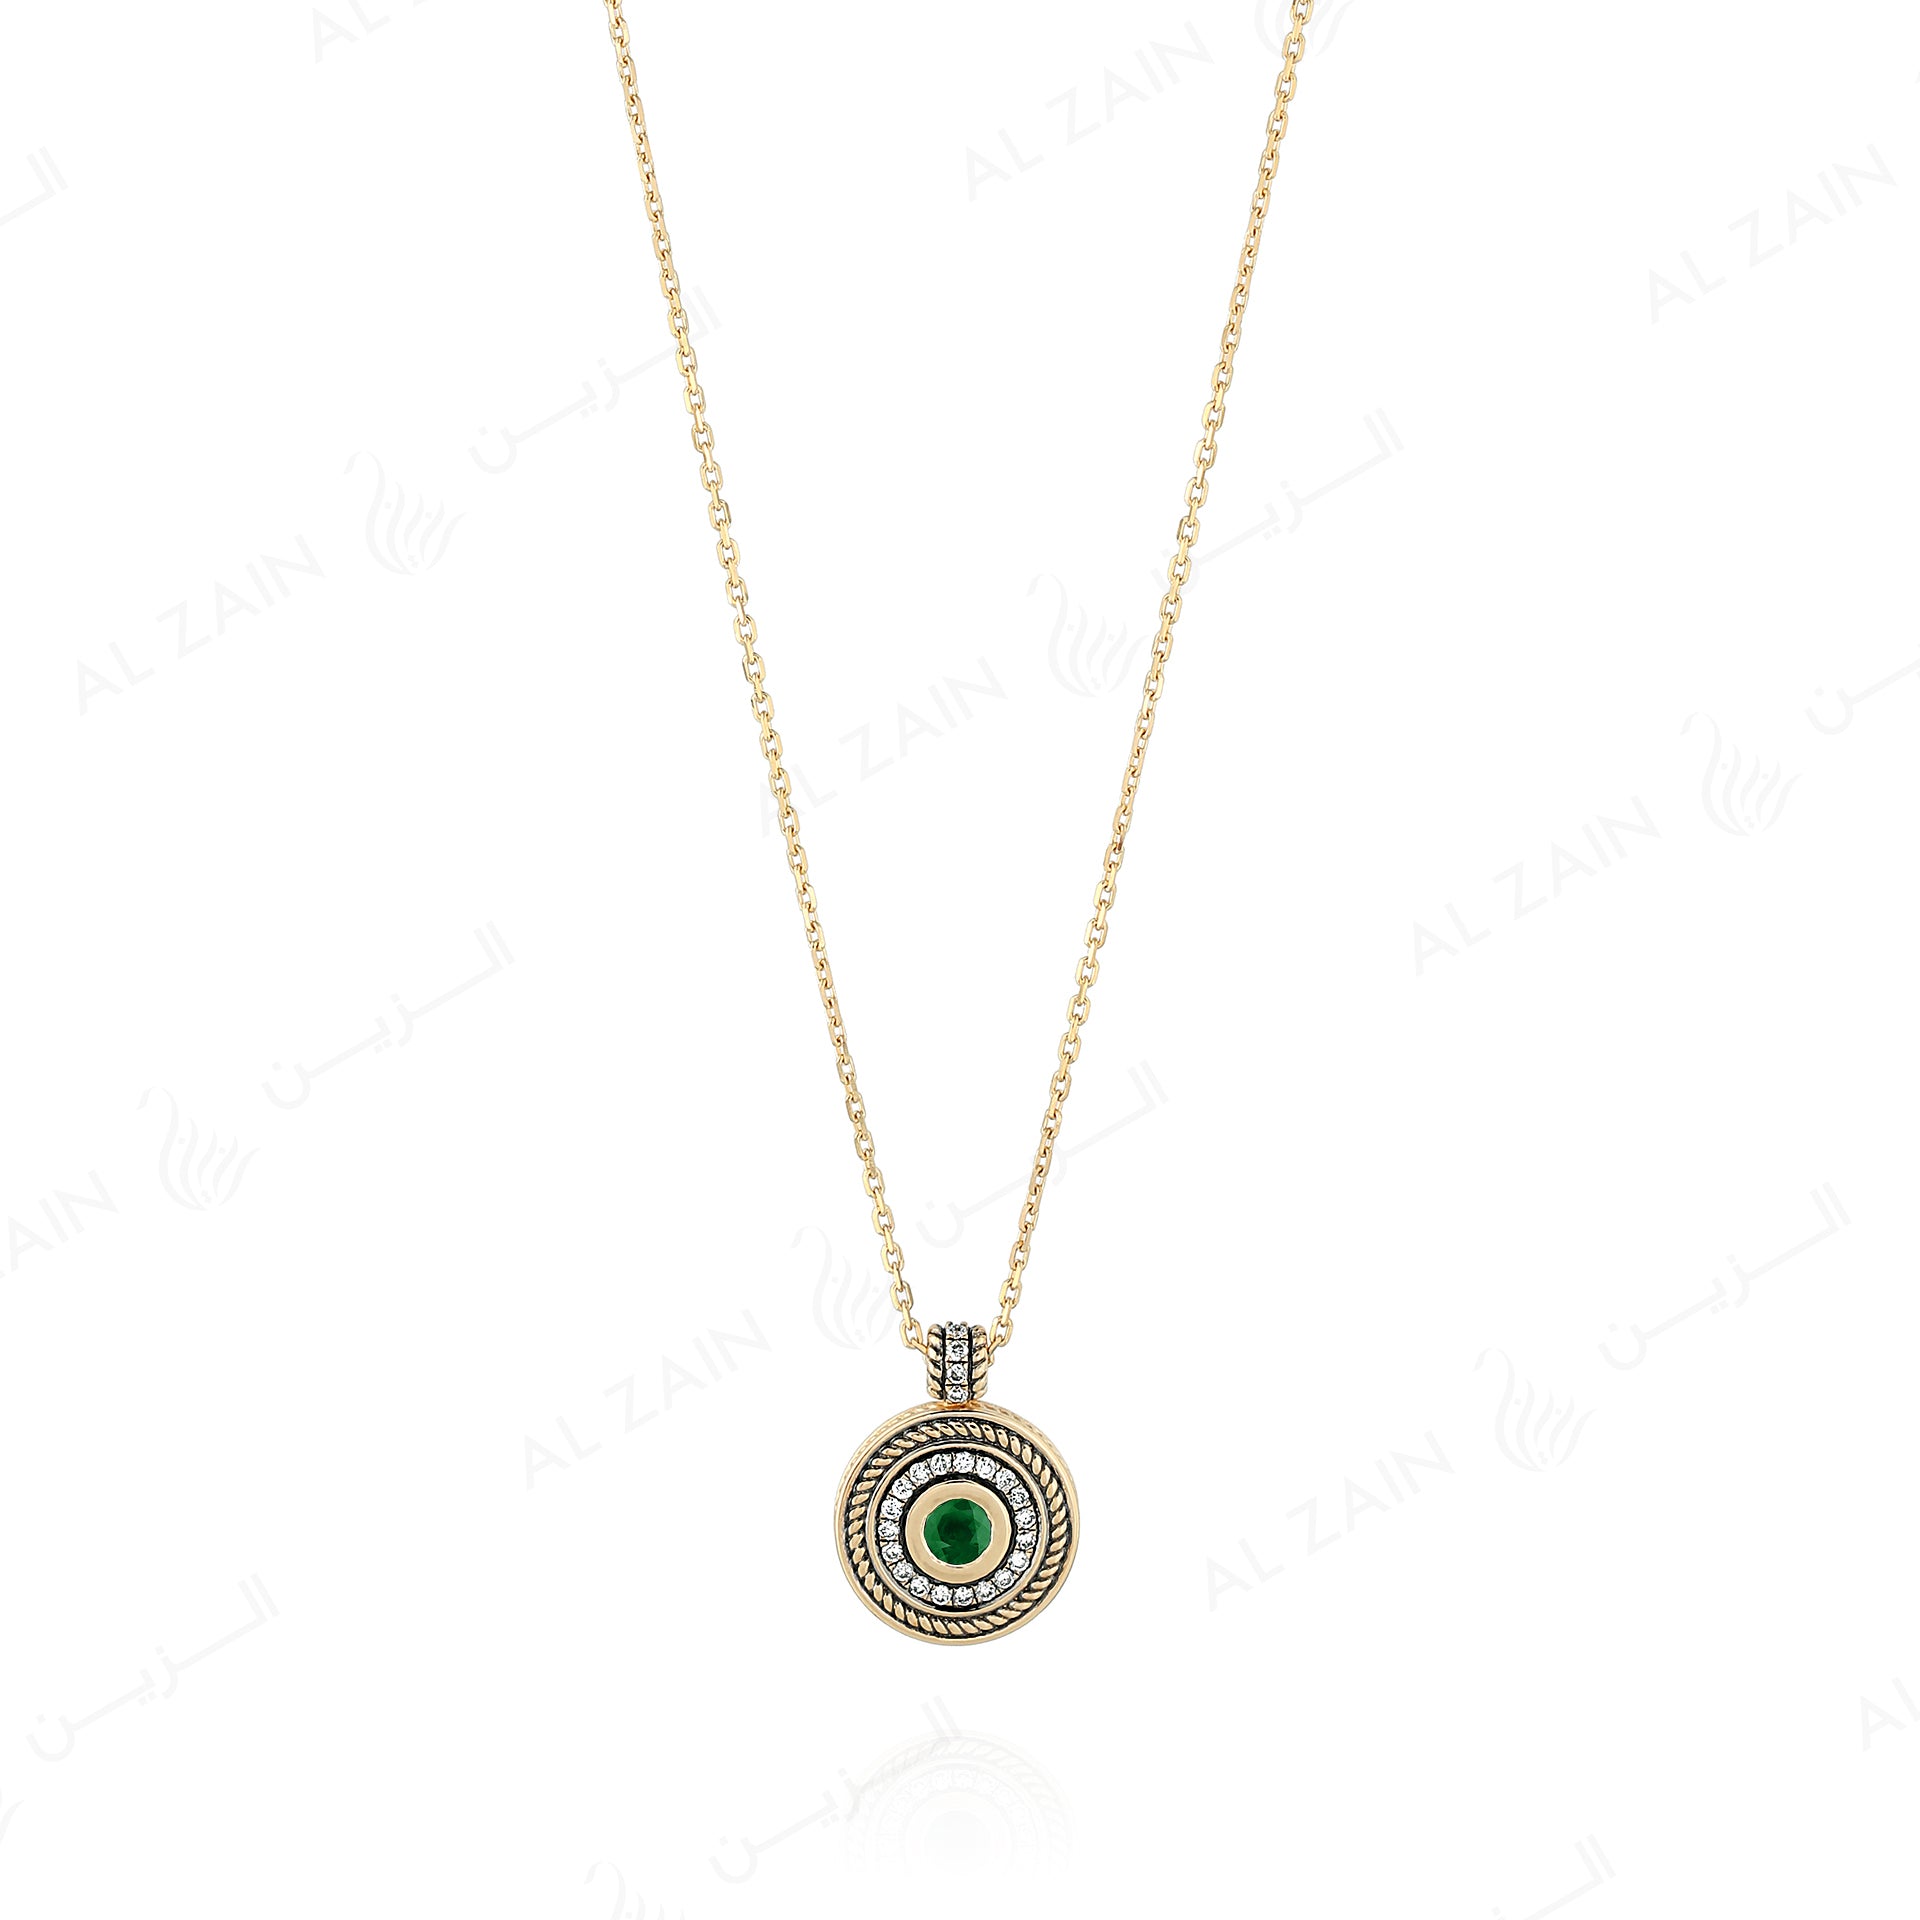 18k Antique Precious Medallion necklace in yellow gold with emerald and diamonds